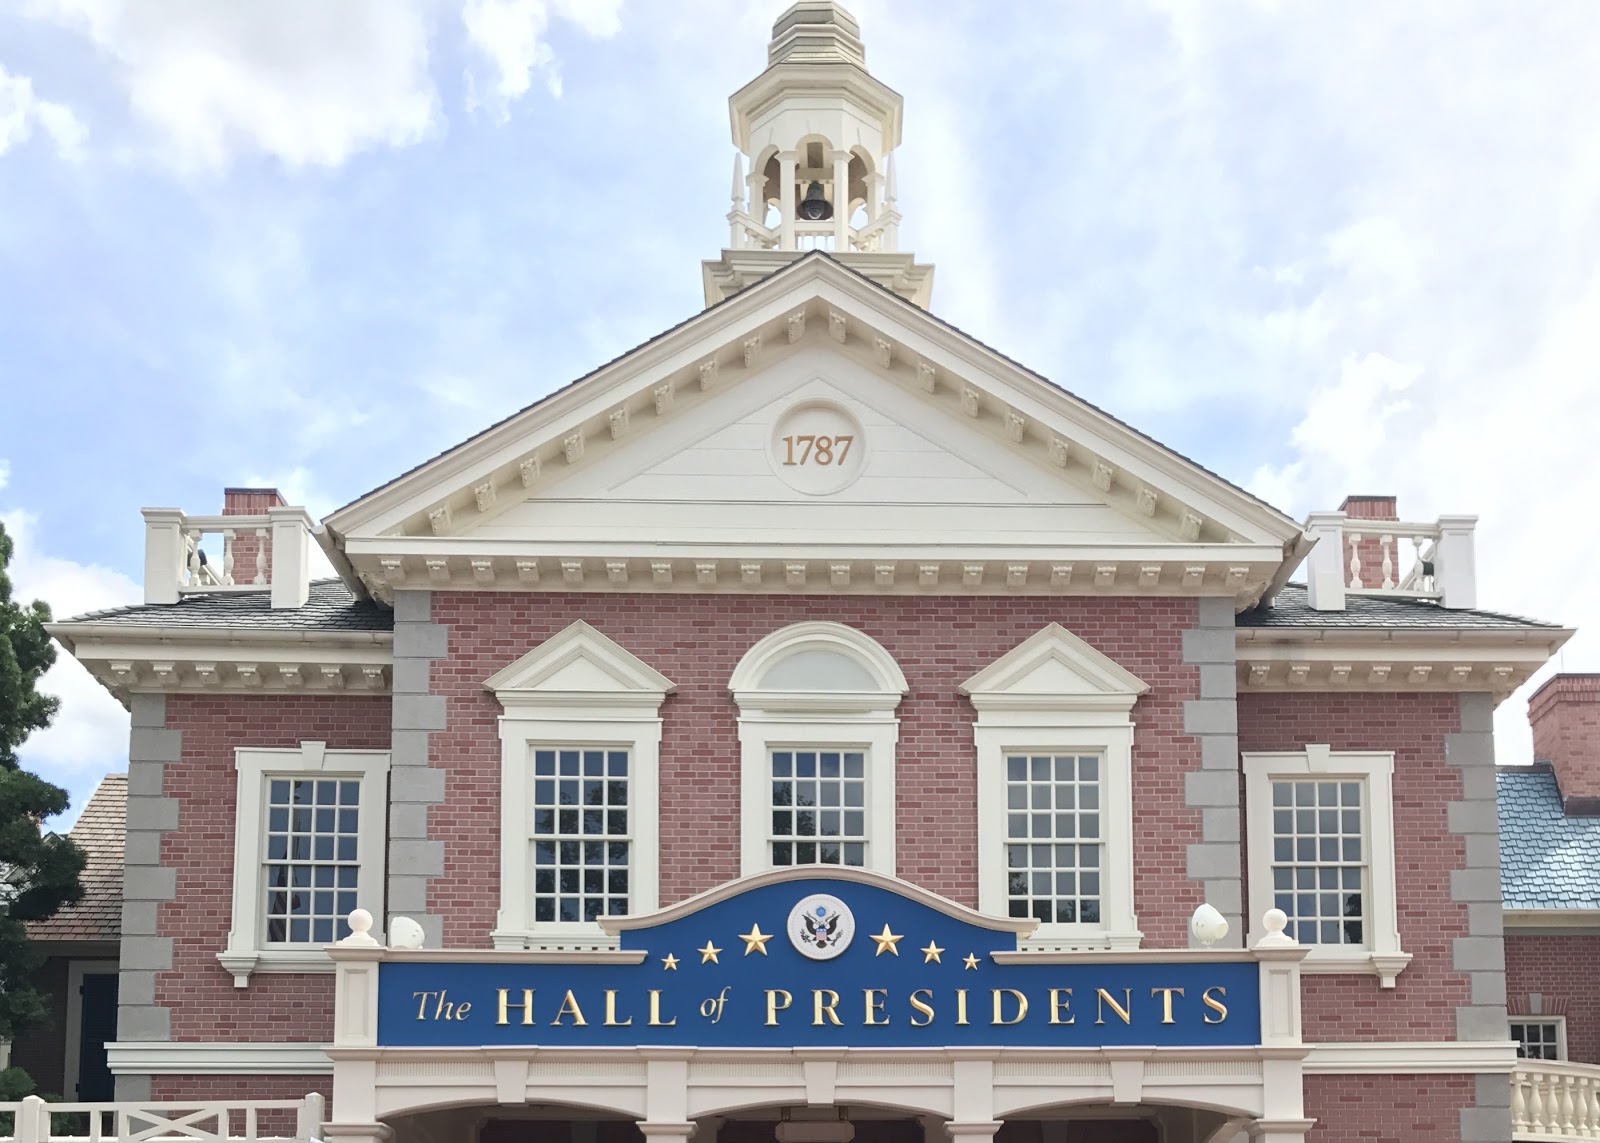 Hall of Presidents Attraction at Magic Kingdom